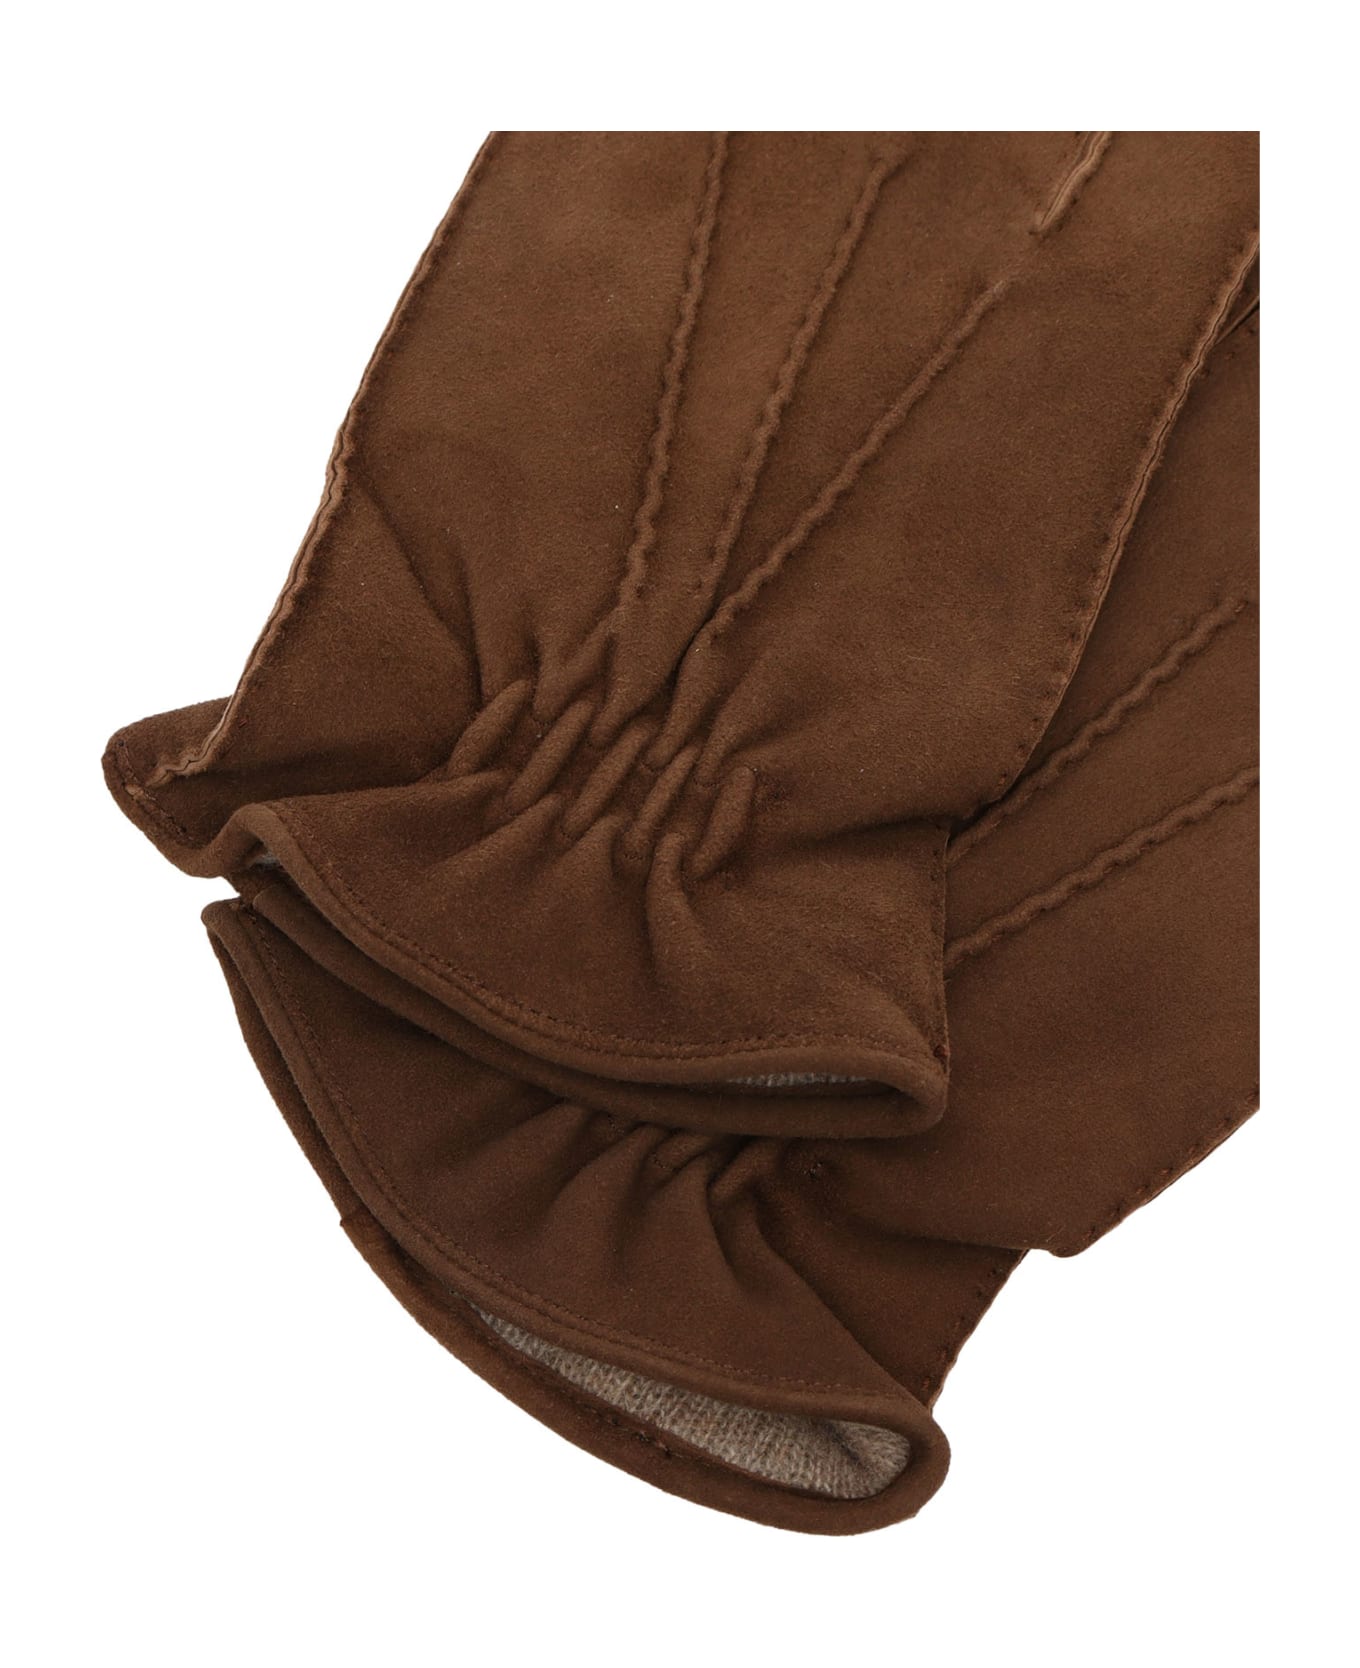 Orciani Suede Gloves - BROWN 手袋